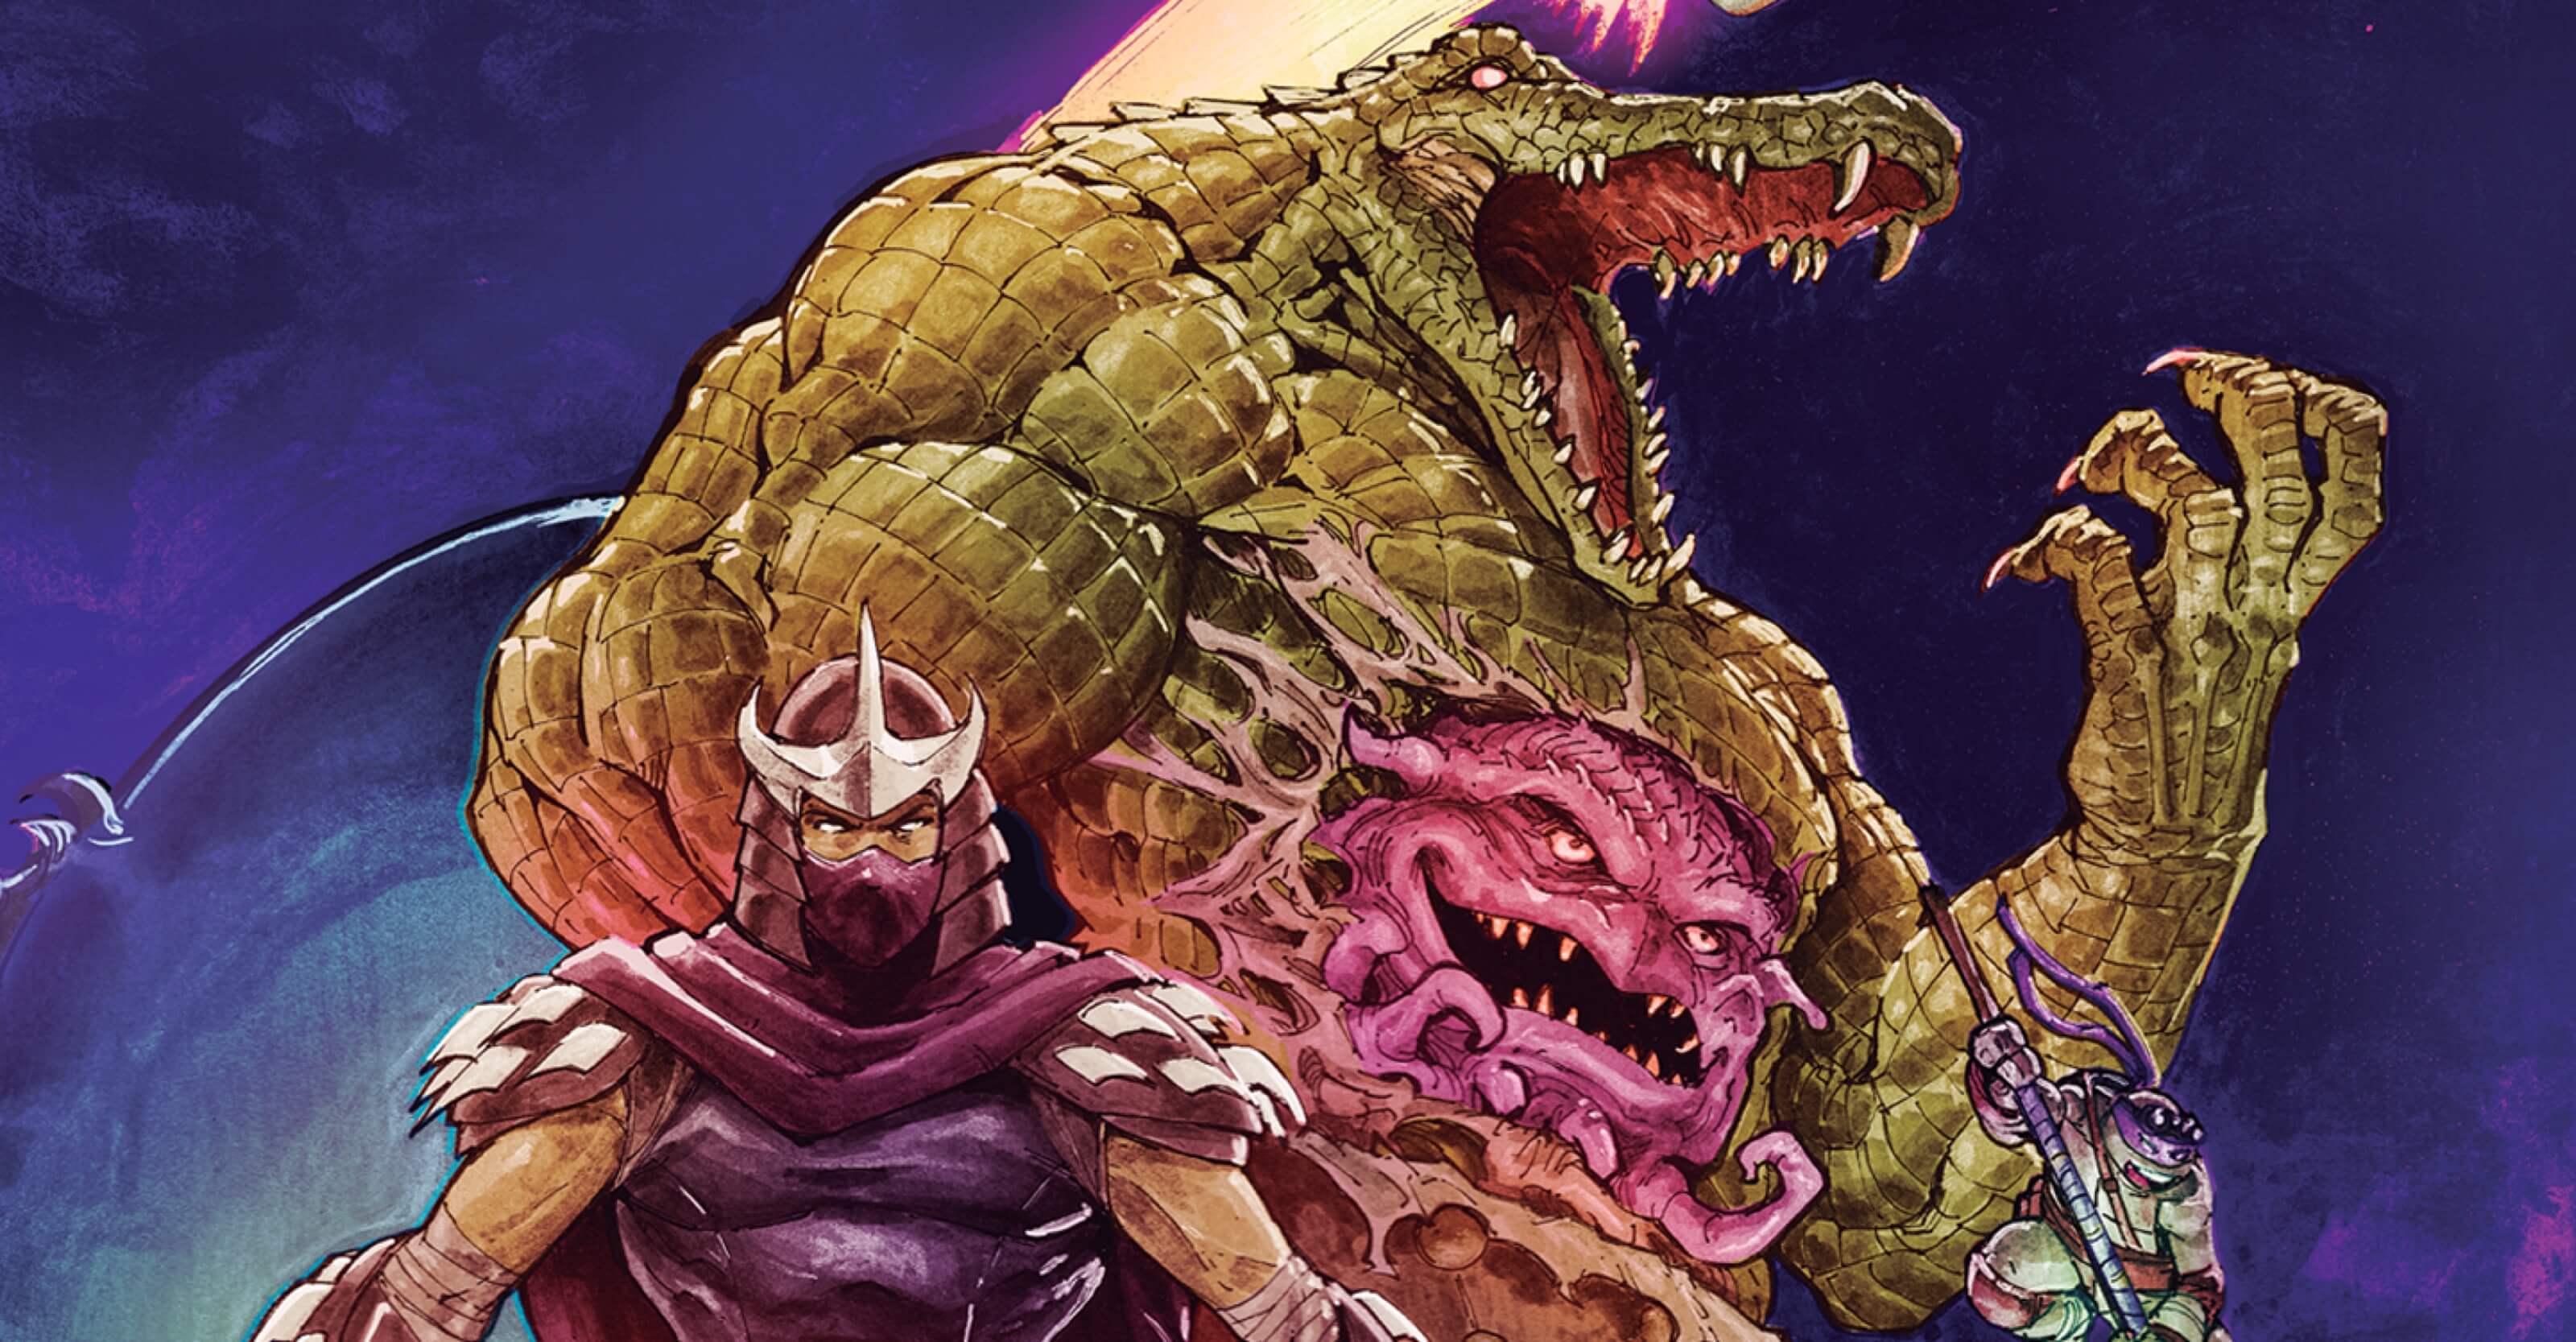 The Shredder leads the TMNT against the Rat King in ARMAGEDDON GAME event  miniseries this August